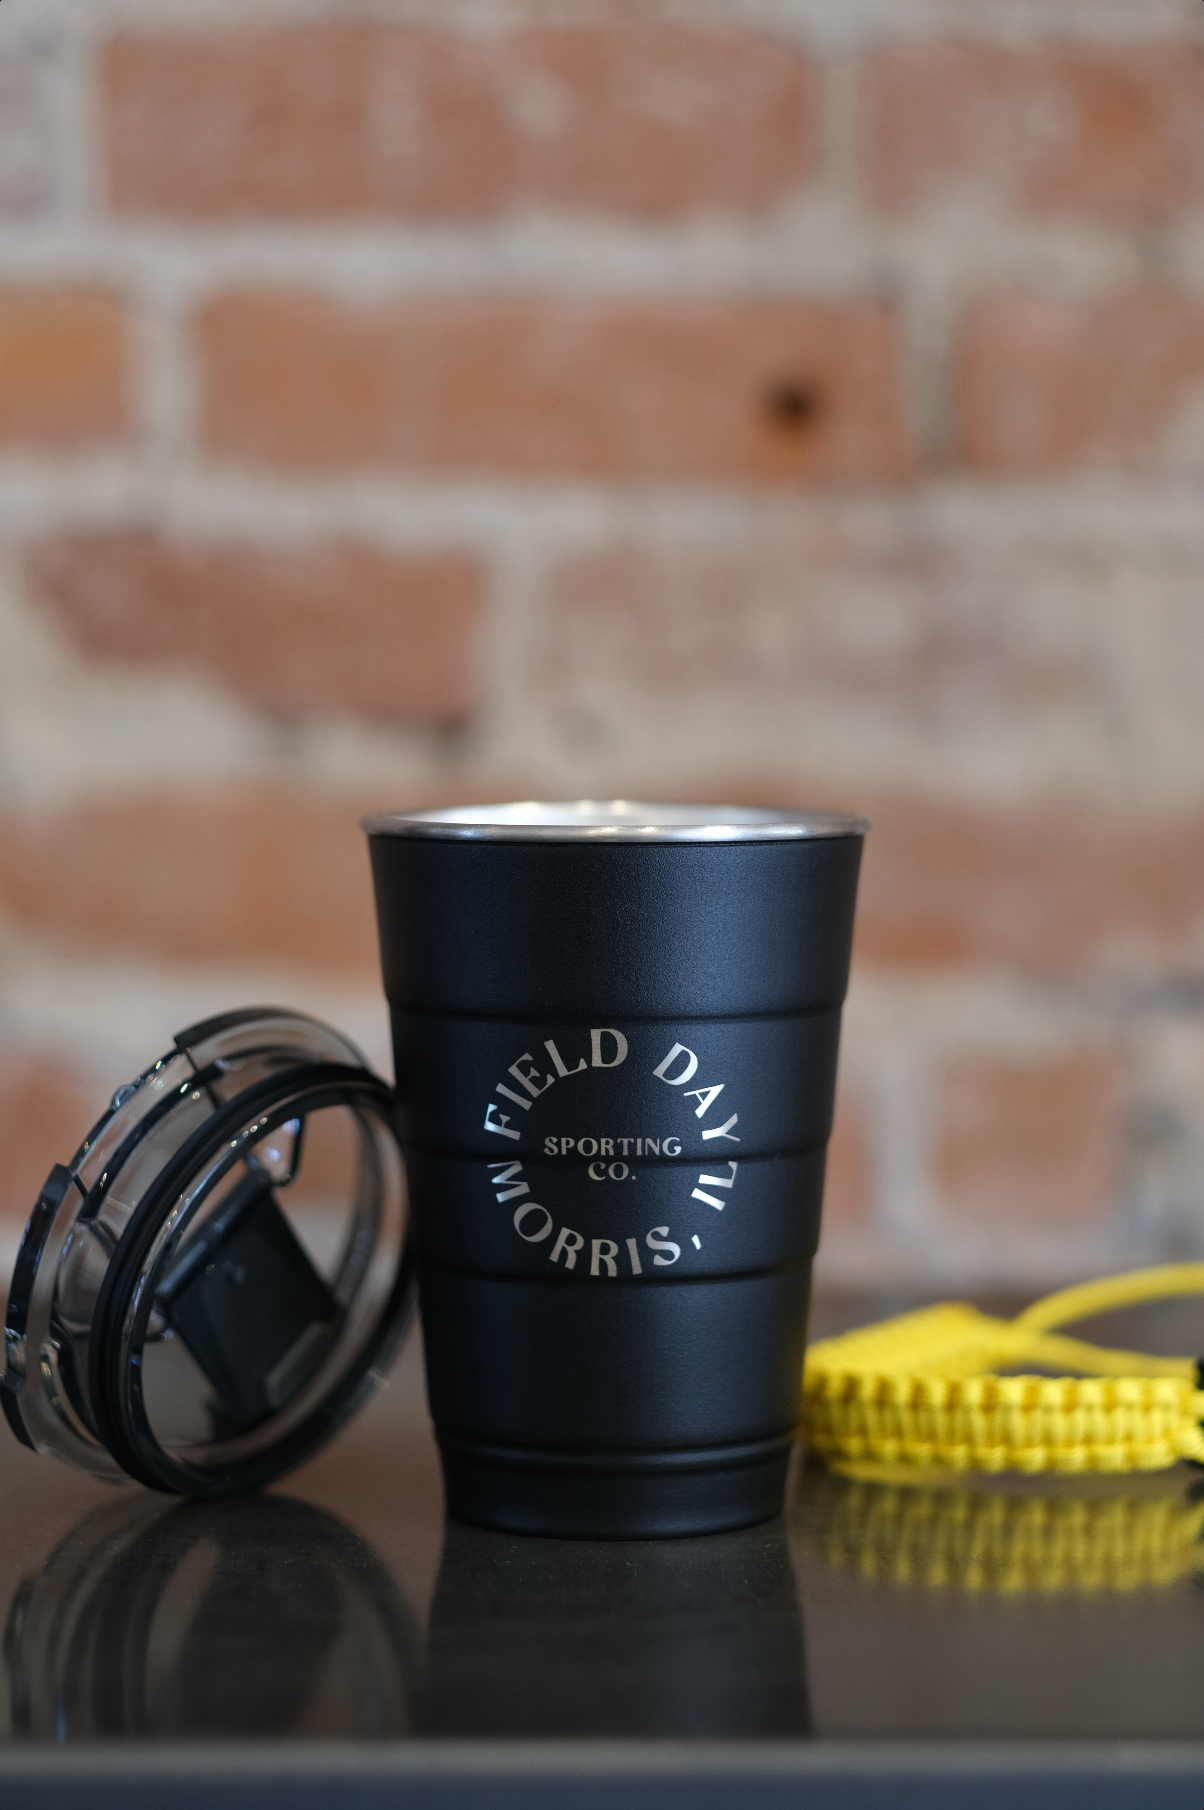 Insulated Stackable Tumbler